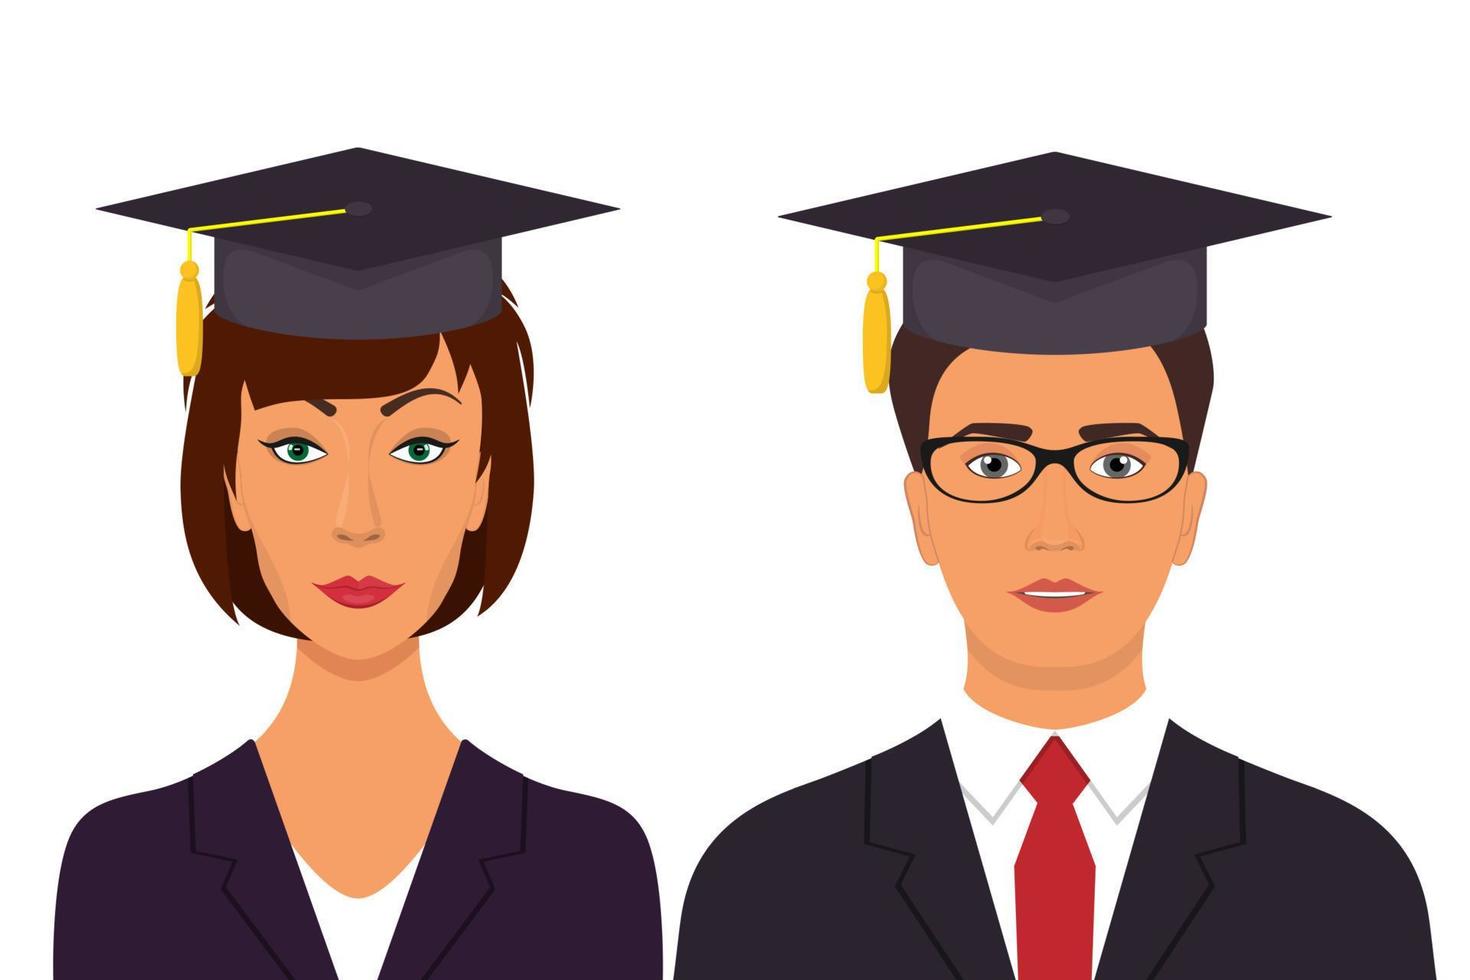 Student s graduation avatars. Man and woman in graduation caps. Vector illustration in flat style.